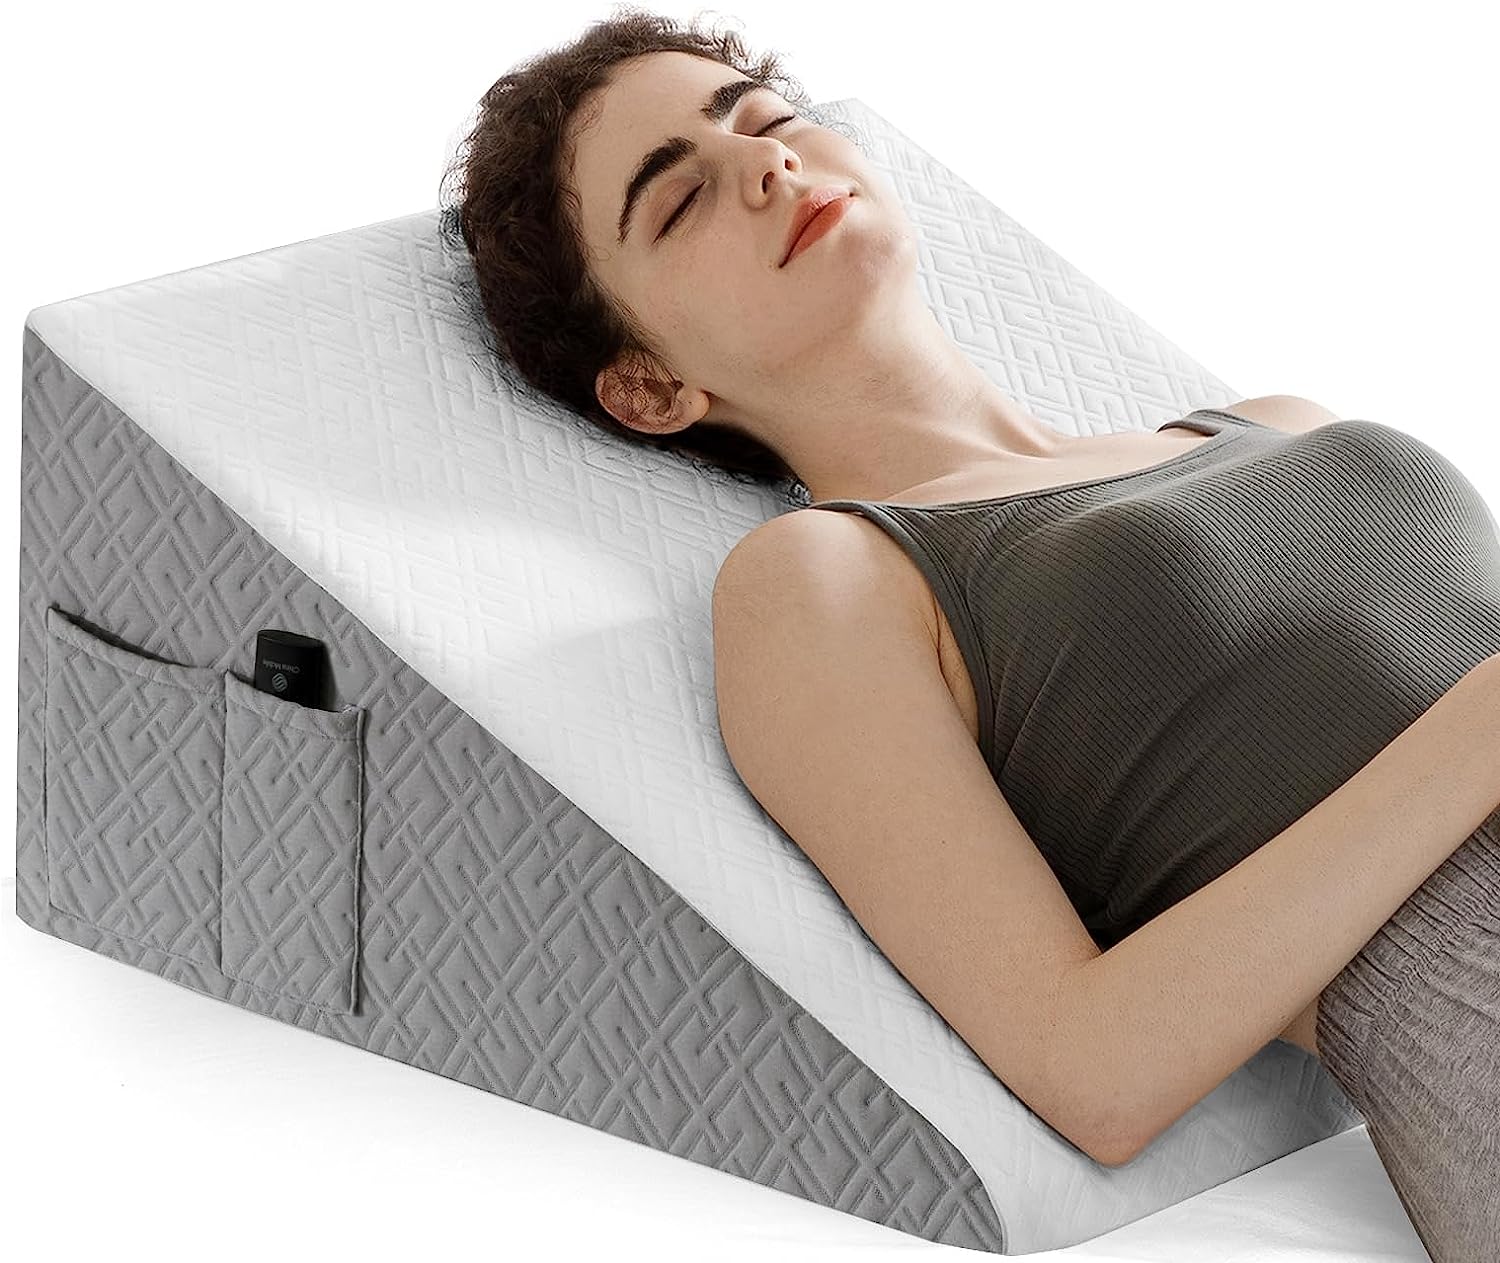 HBlife Wedge Pillow: The Comprehensive Review You Need